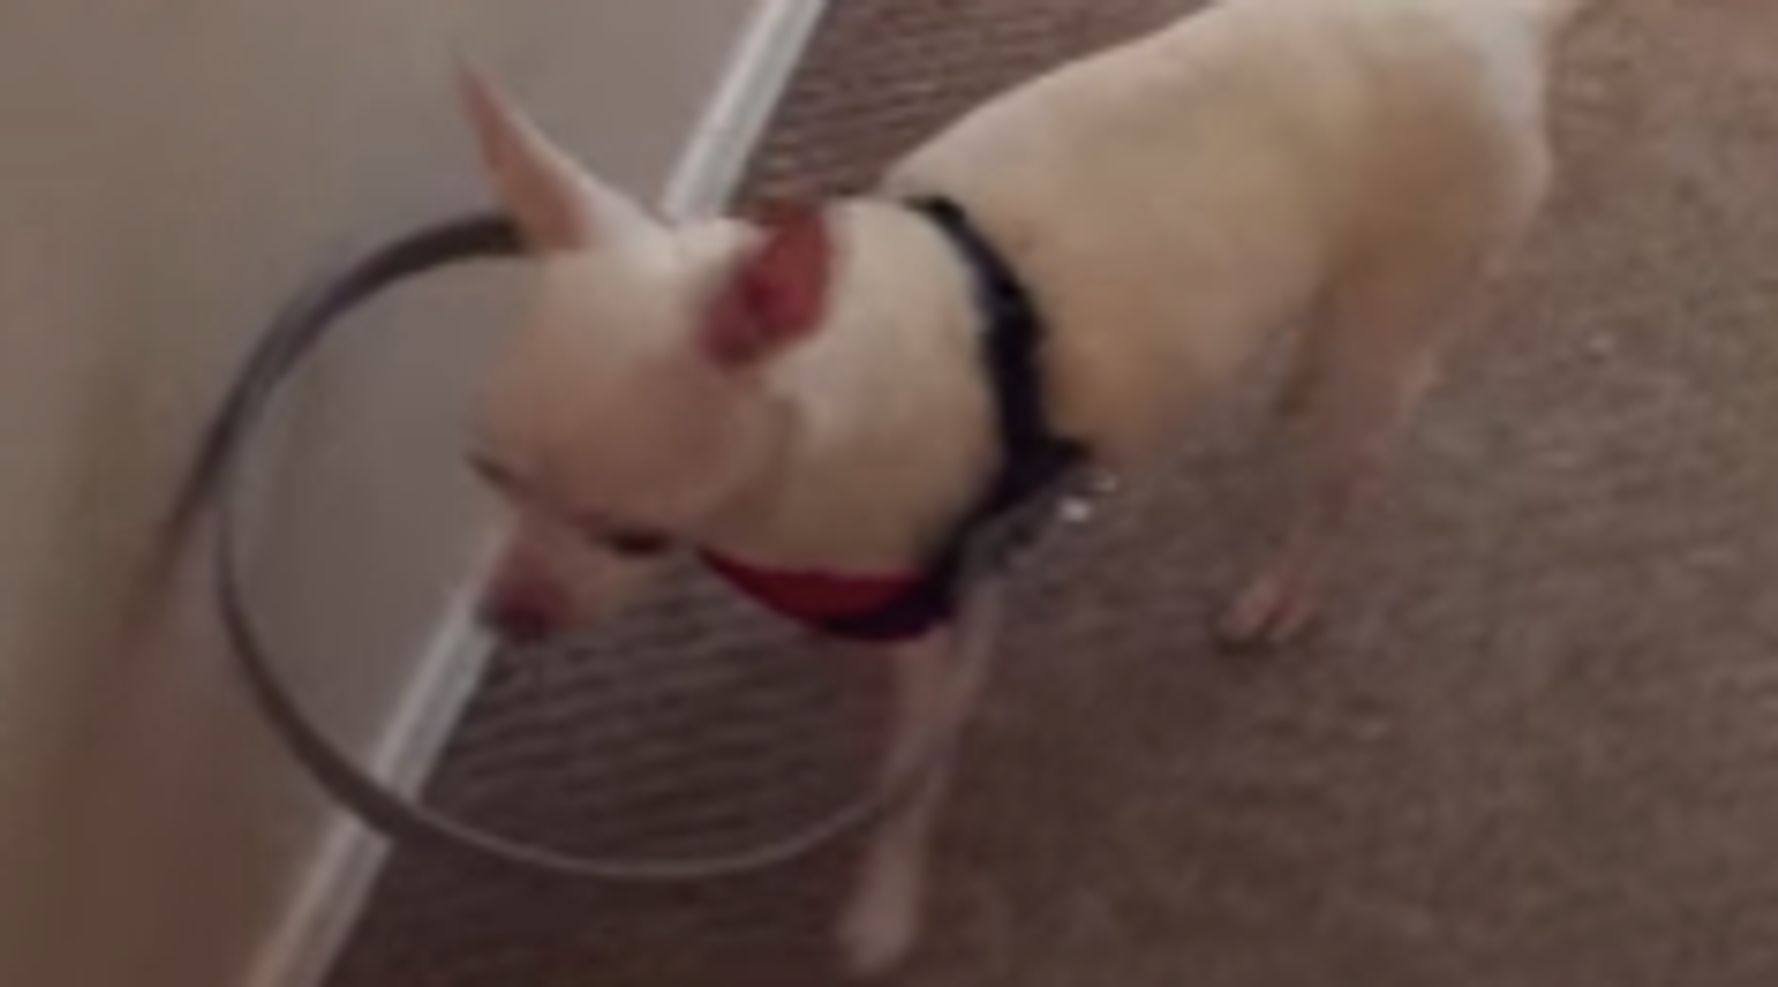 Homemade Bumper Device Helps Blind Dog Walk With 'Confidence' | HuffPost Good News